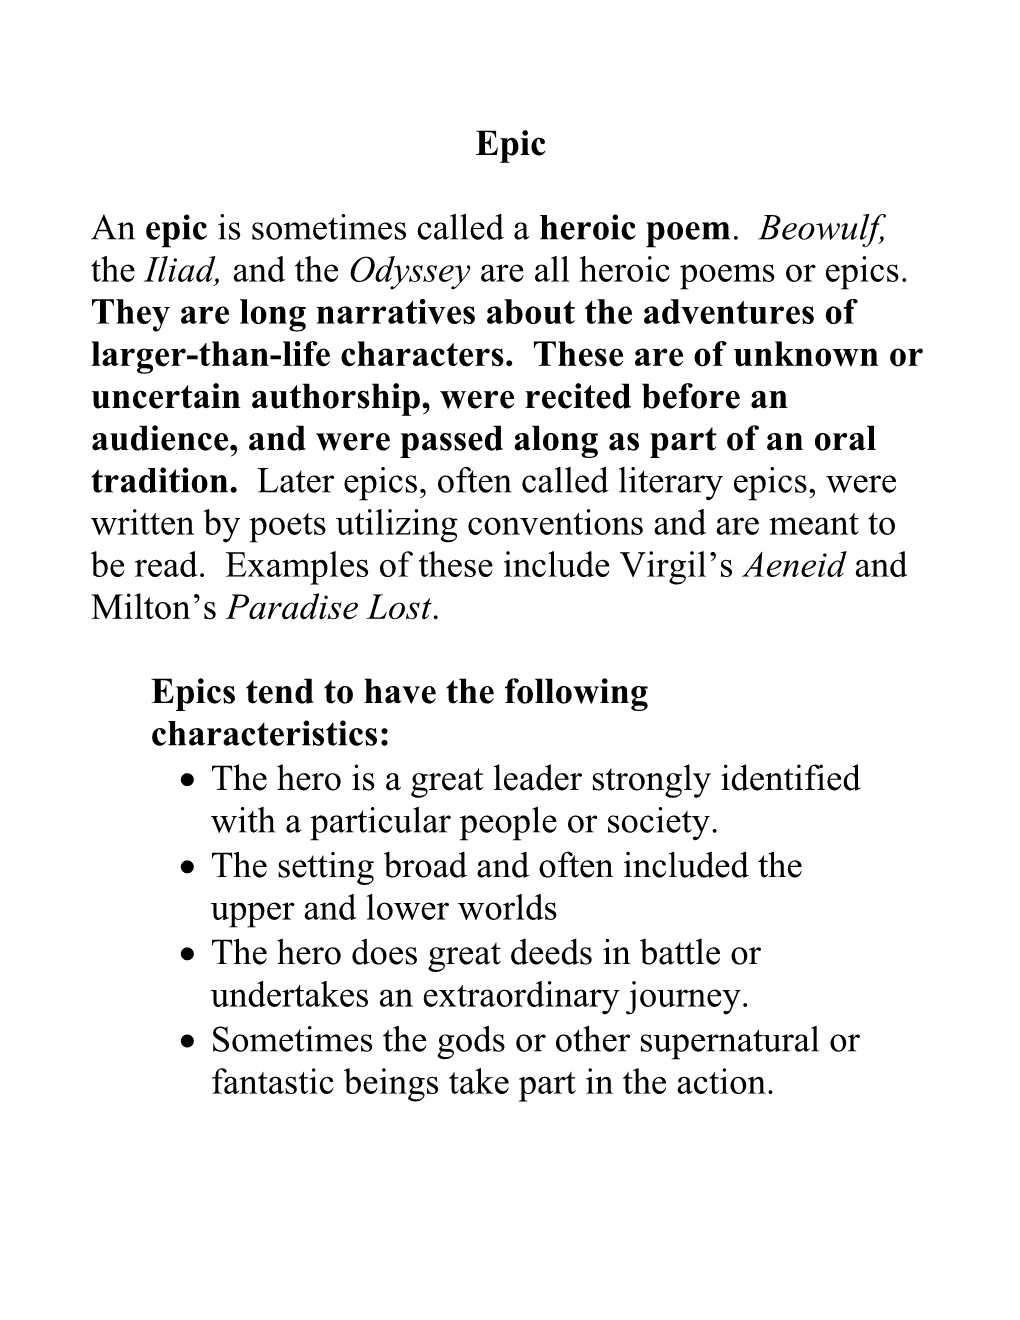 Epics Tend to Have the Following Characteristics